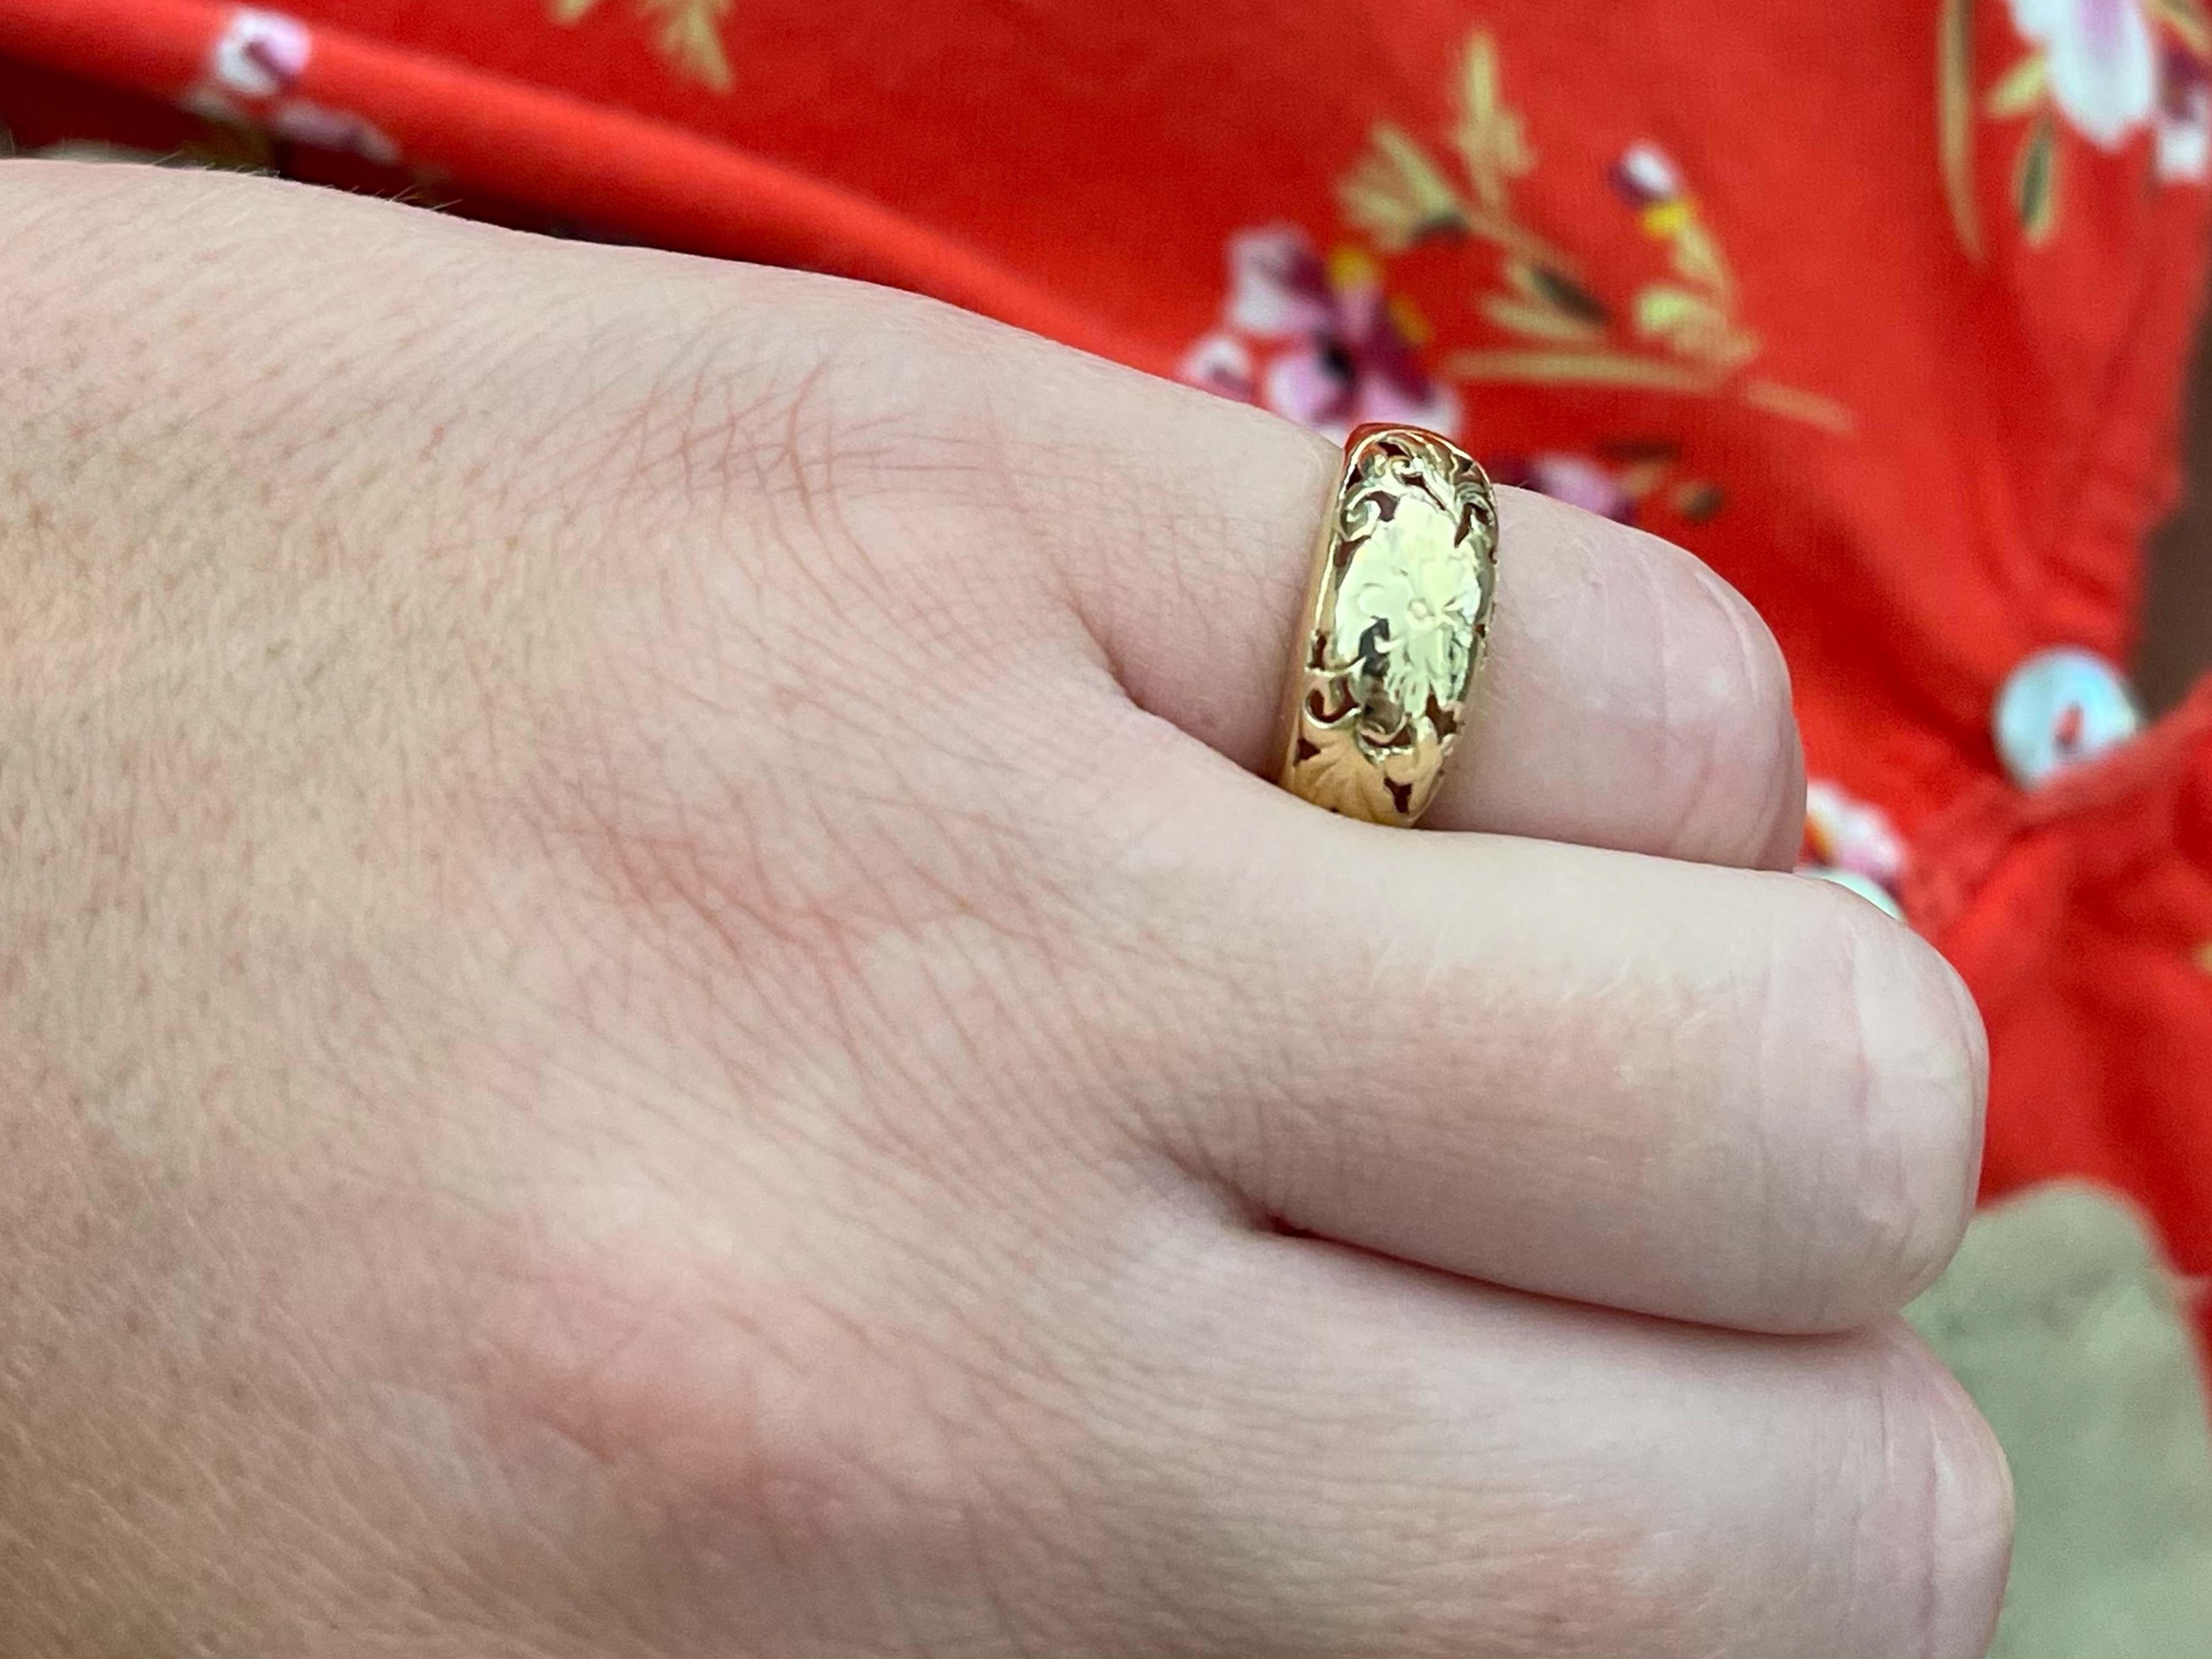 Ring Specifications:

Designer: Ming's

Metal: 14k Yellow Gold

Total Weight: 2.9 Grams

Ring Size: 4.5 (resizable)

Stamped: 